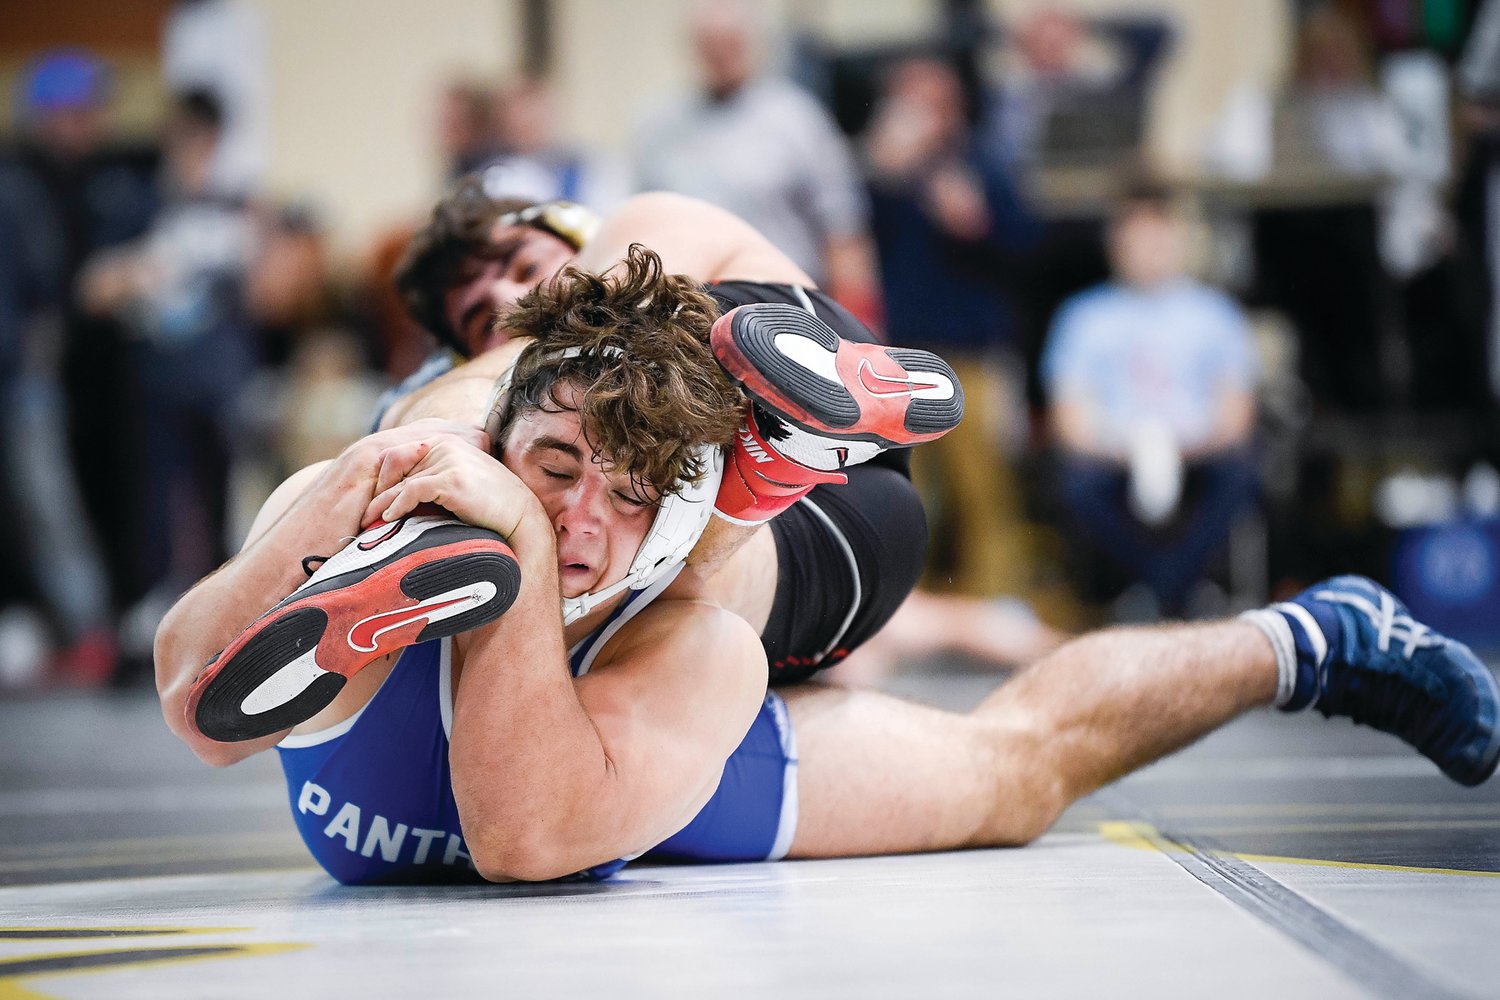 Quakertown’s Calvin Lachman gets a hold of Mt. Olive’s Anthony Moscatello’s foot during his 215-pound semifinal 2-1 decision loss.